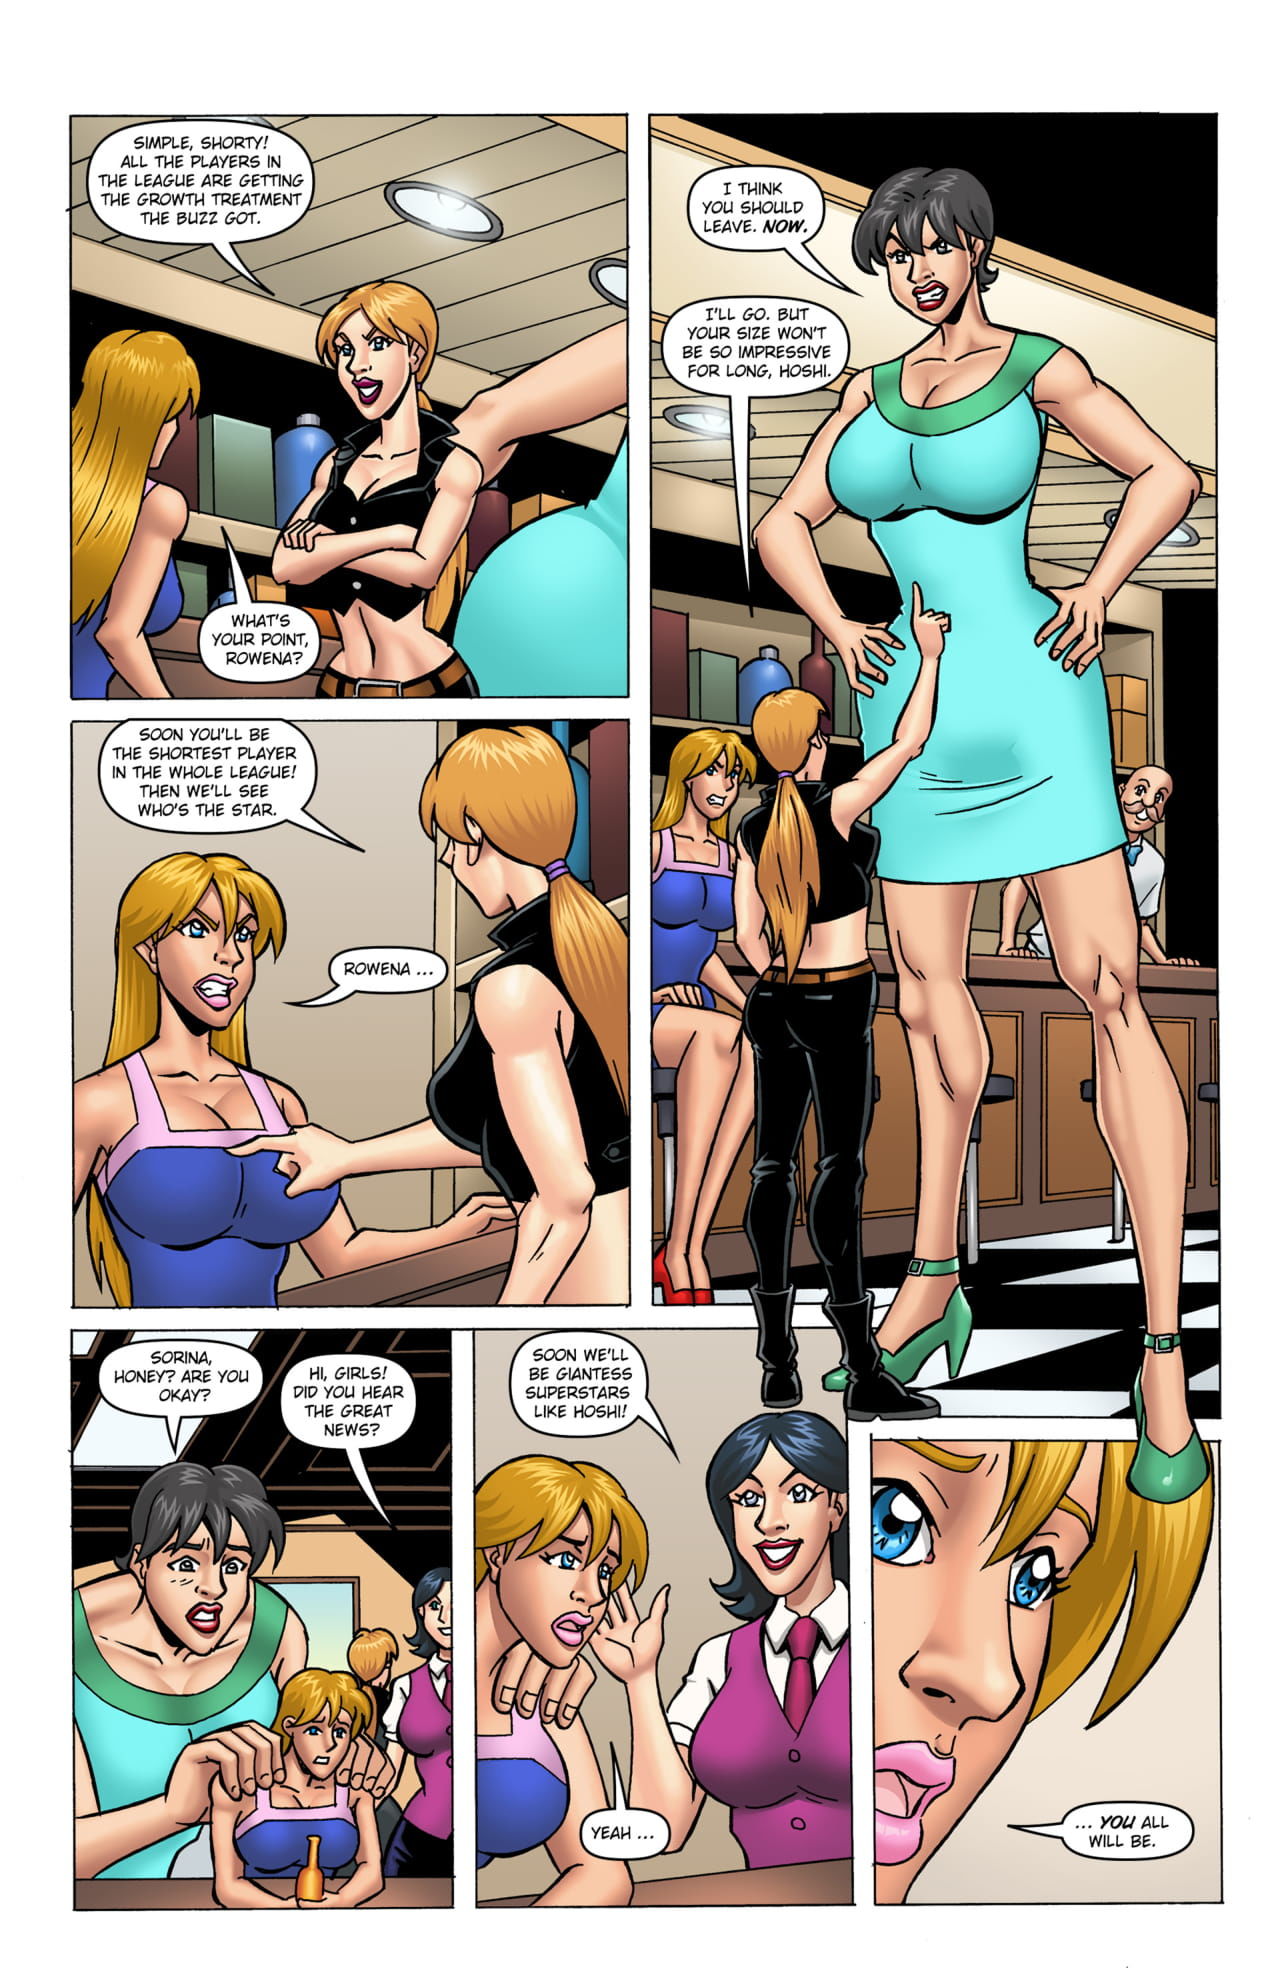 Growing The Franchise Issue 2 GiantessFan page 5